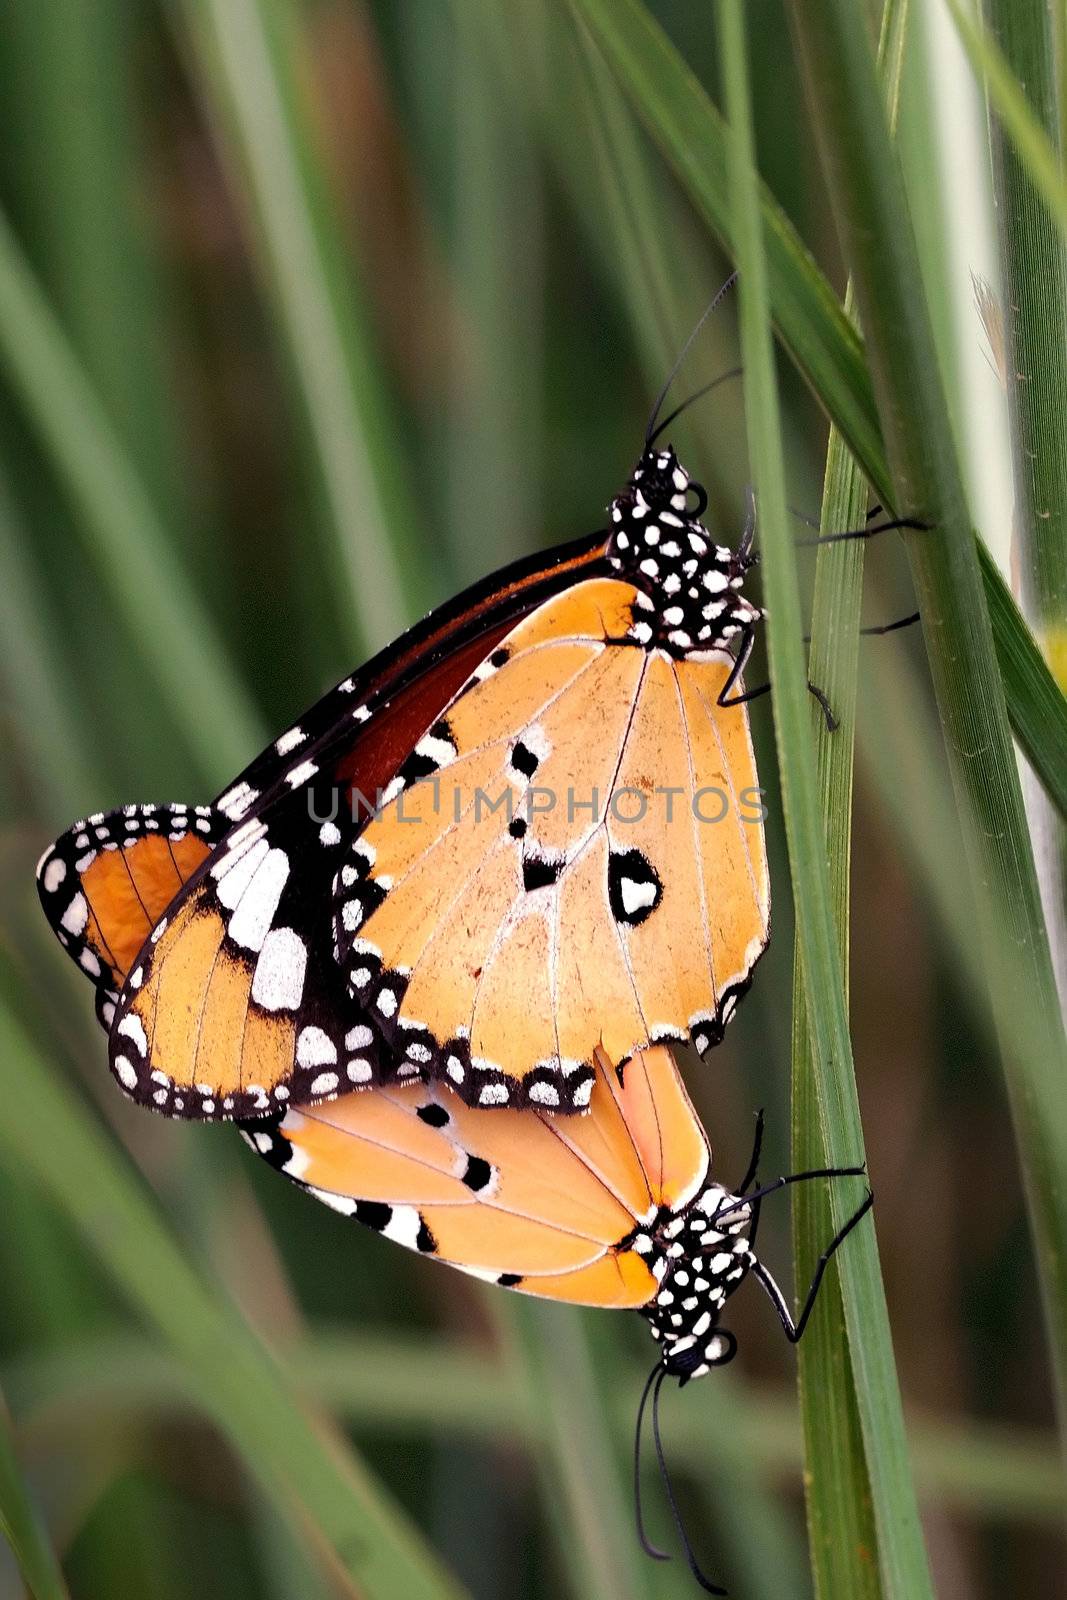 A pair of plain tiger butterflies mating early morning